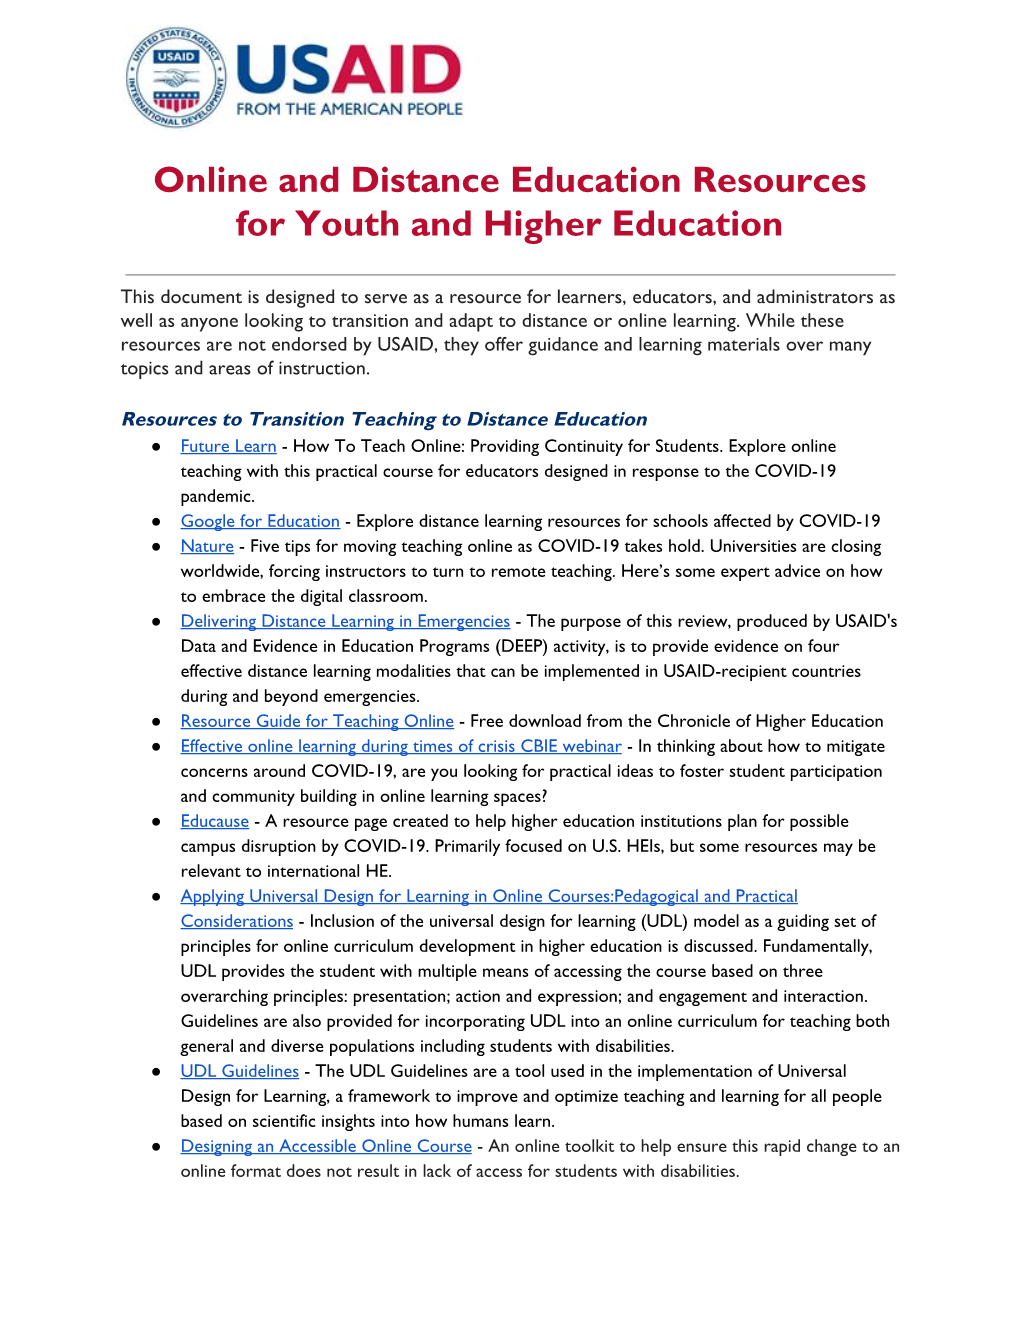 Online and Distance Education Resources for Youth and Higher Education